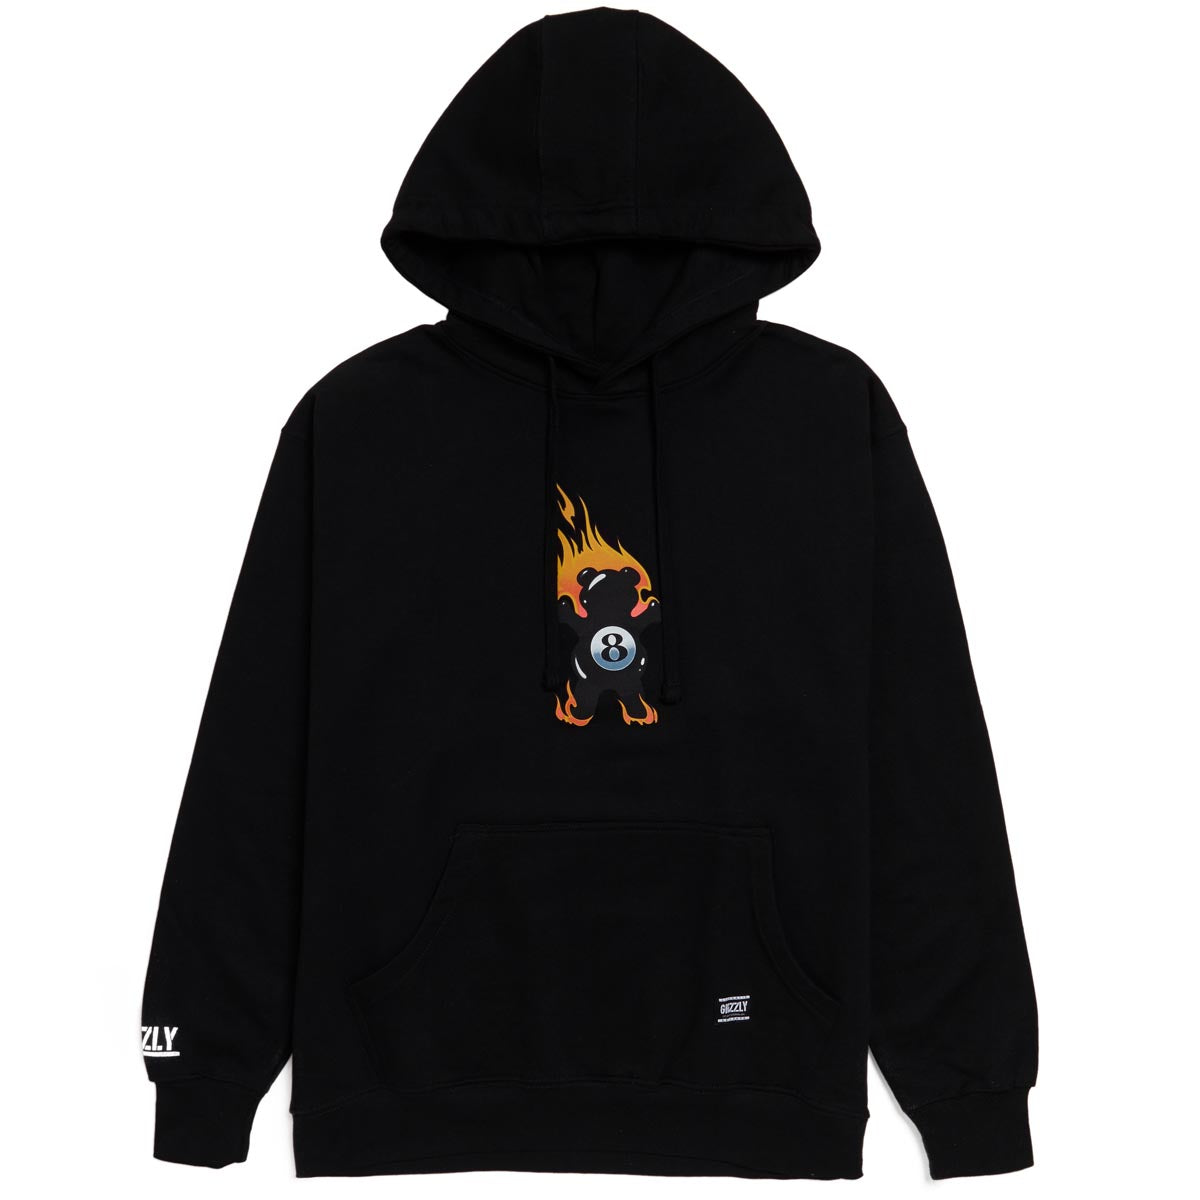 Grizzly Behind The 8Ball Hoodie - Black image 1